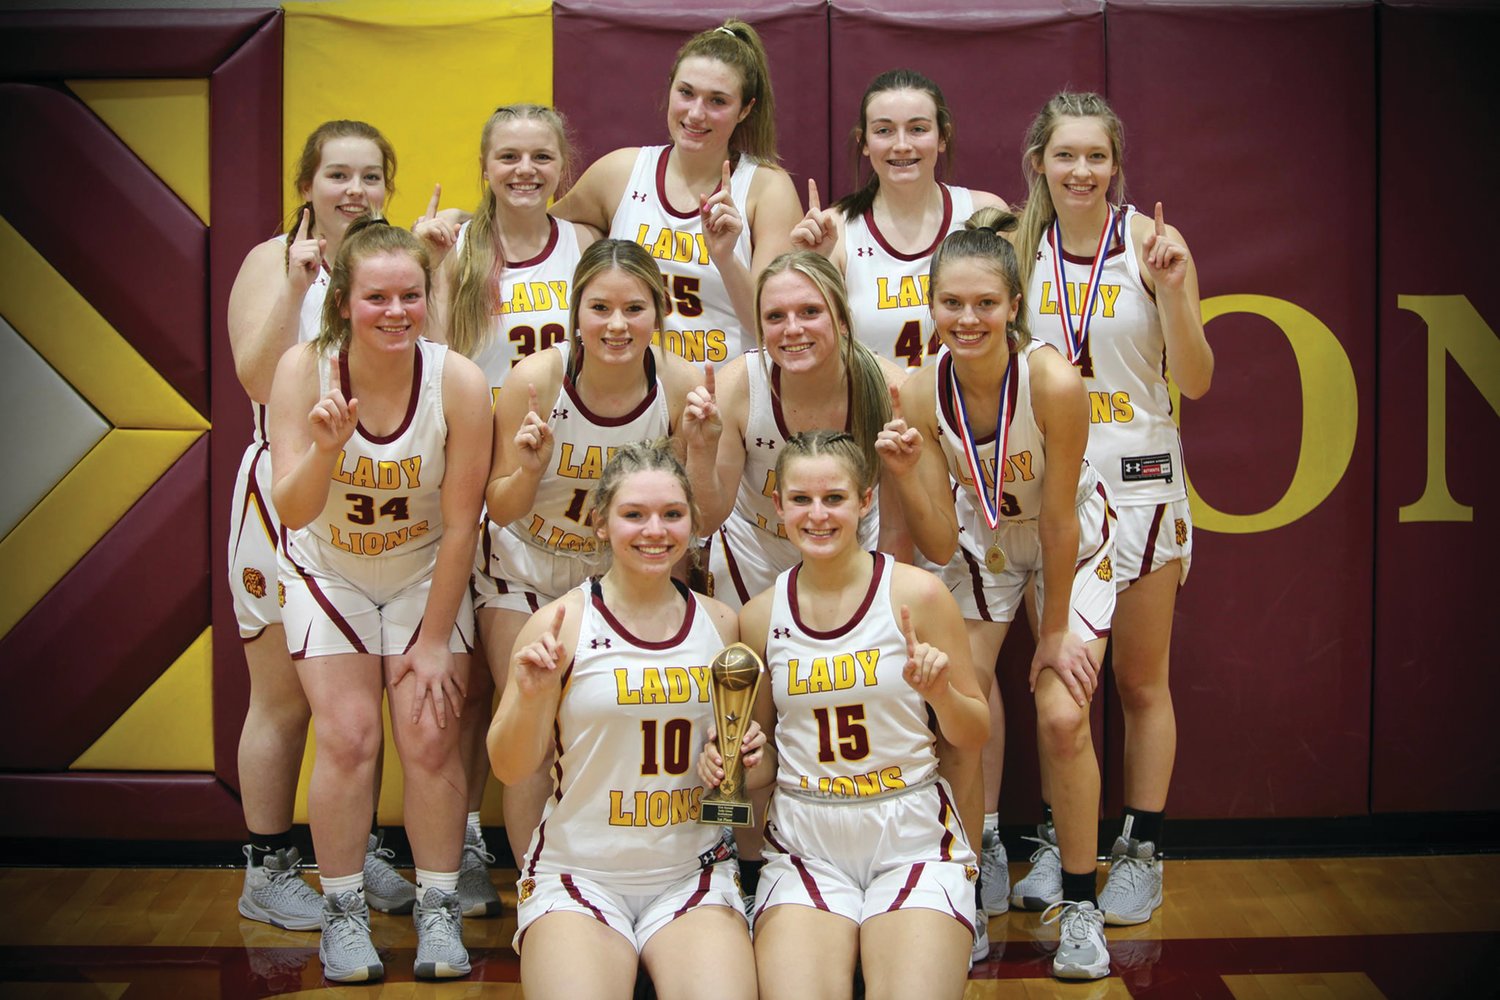 The Mansfield Lady Lions after beating Springfield Catholic by 20 points to win the Lady Lion Invitational title.